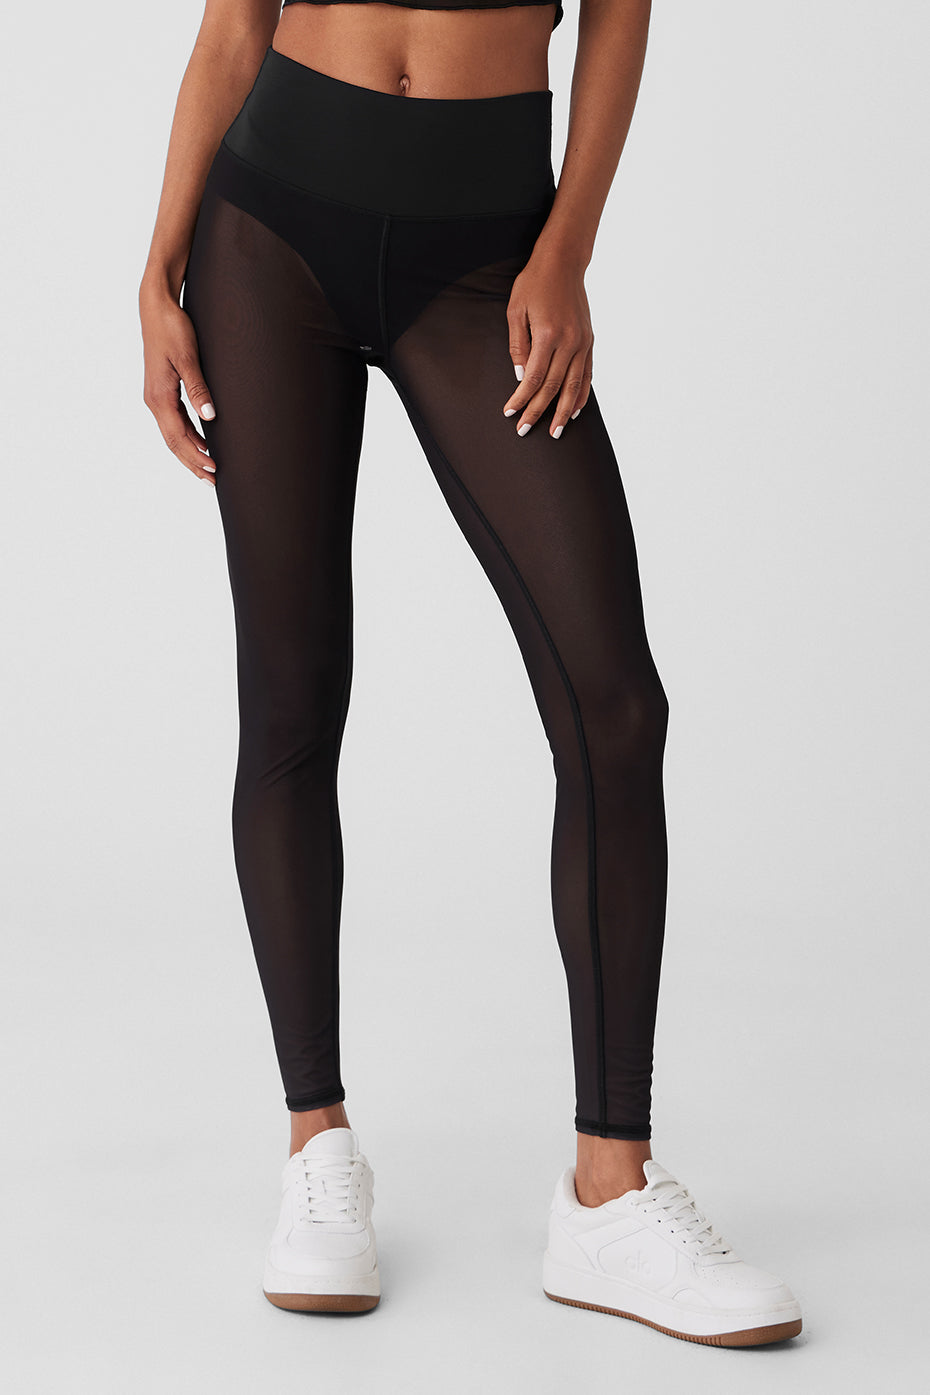 Alo Yoga  Yoga leggings, clothes, and accessories for studio to